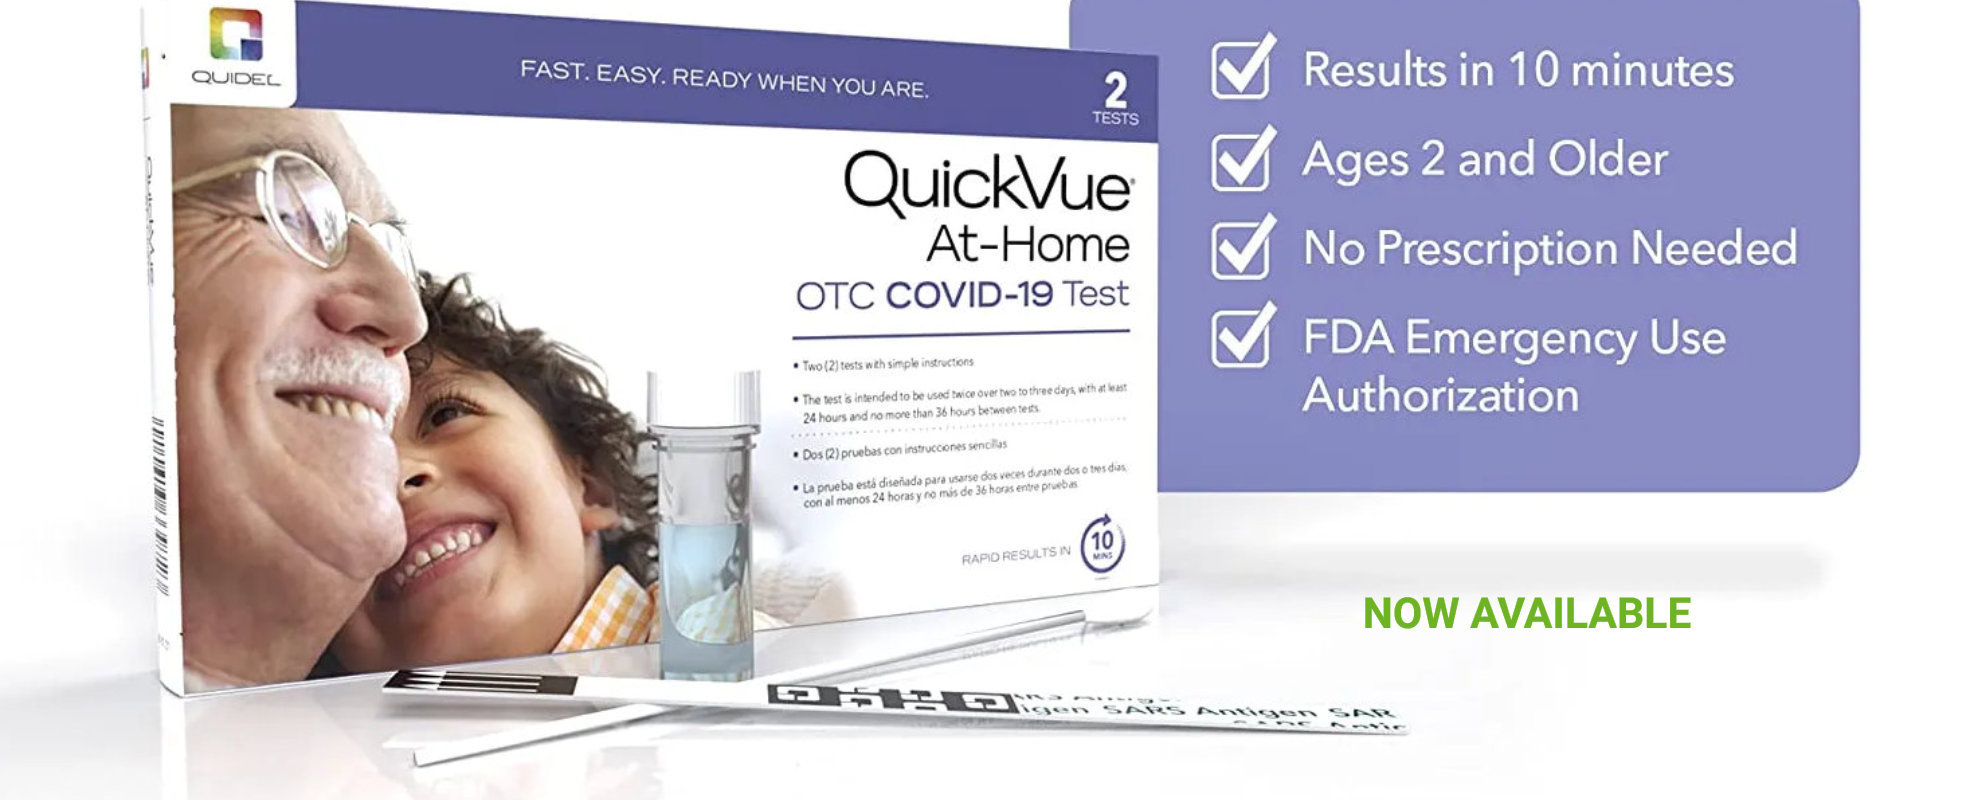 Rapid test - Quickvue at-home COVID-19 TEST 2